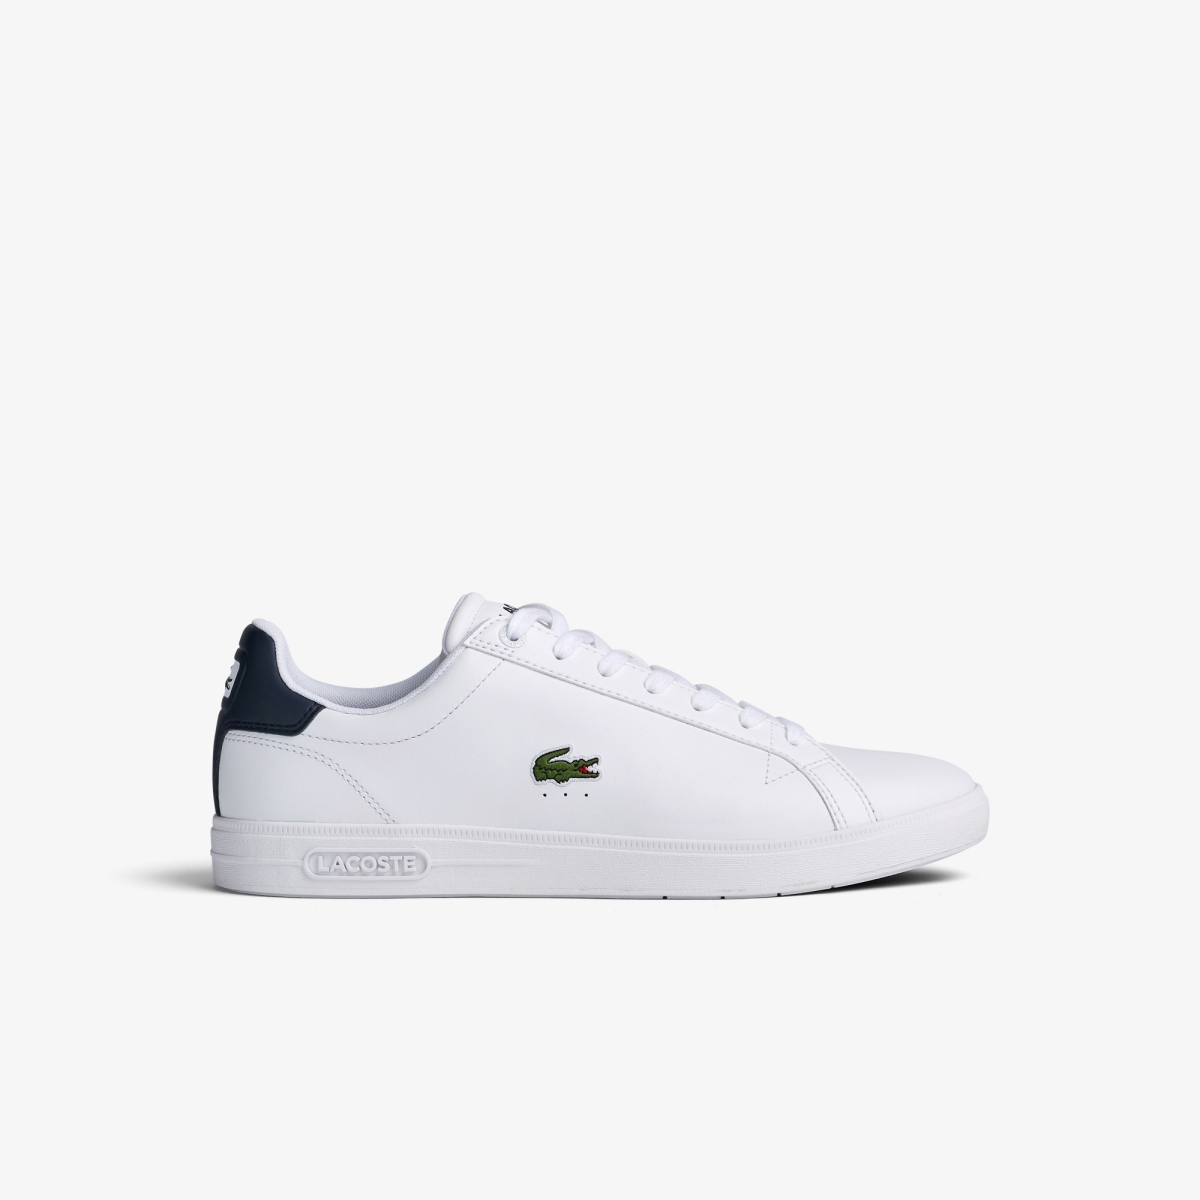 Buy Men's Shoes Collection Online | Lacoste Indonesia